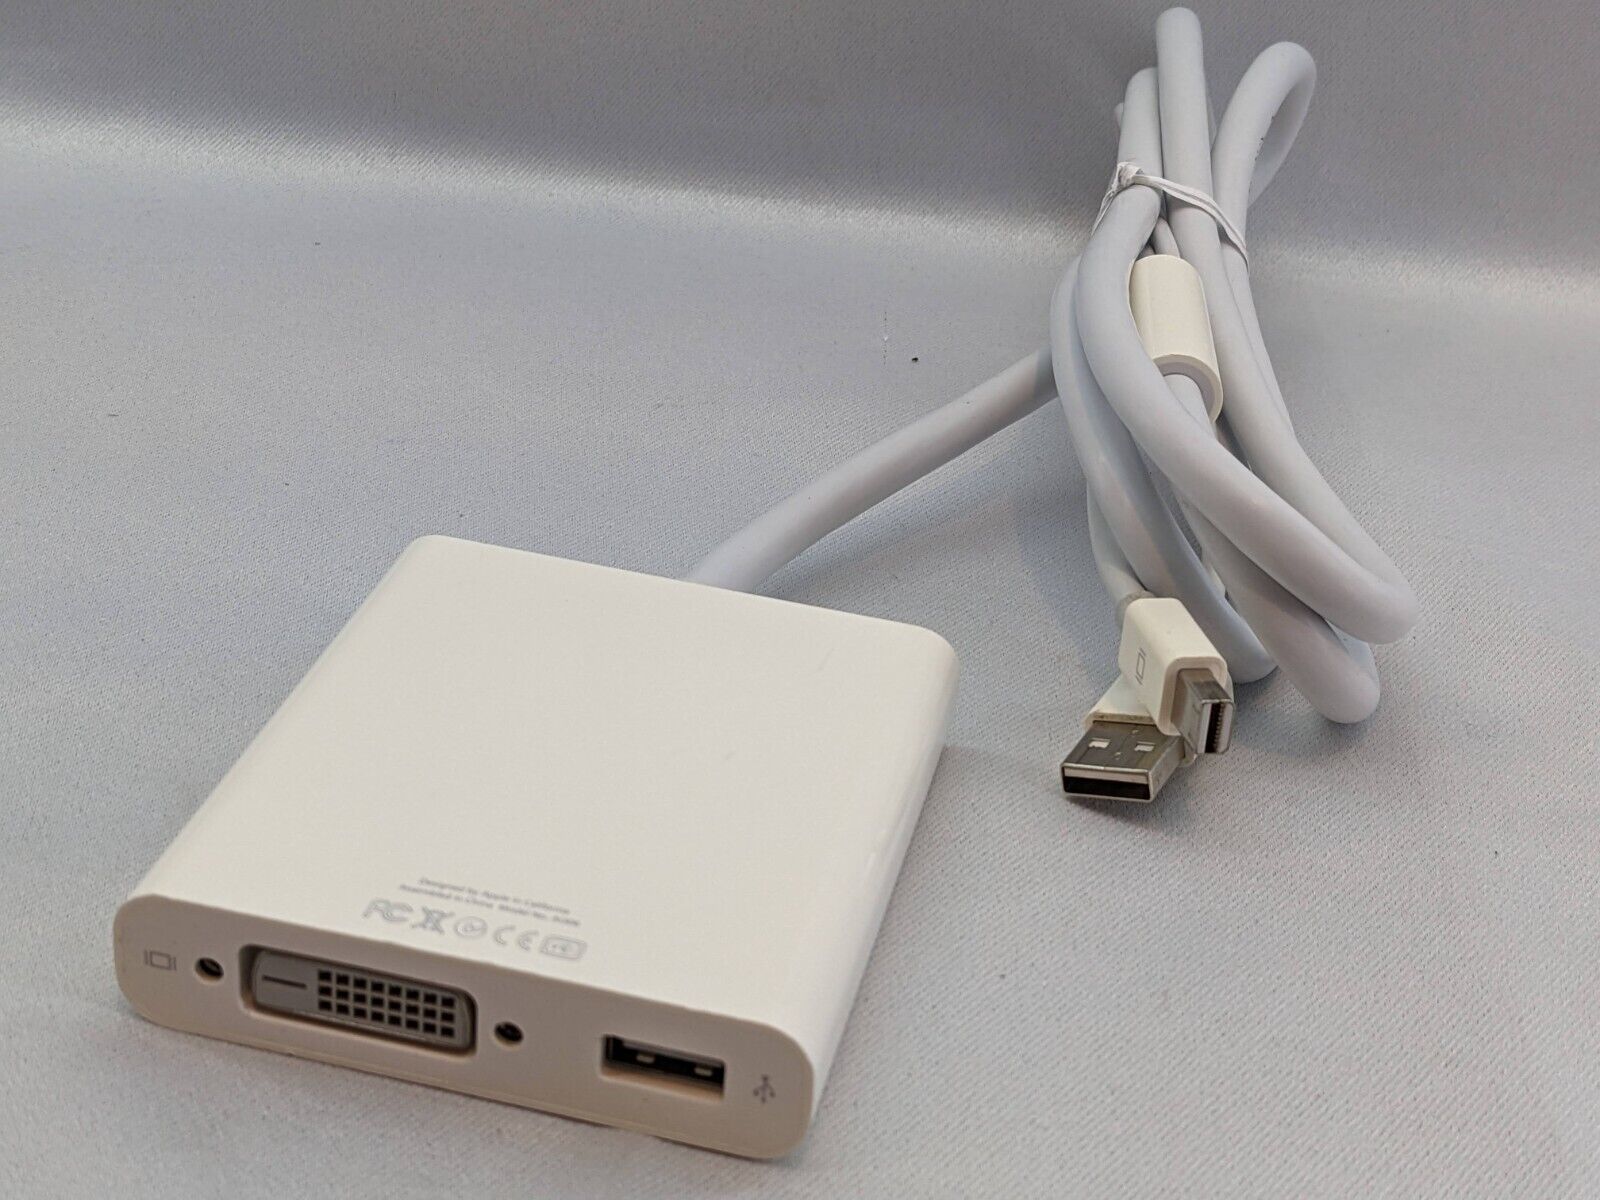 Primary image for Apple A1306 White Mini Display Port to Dual-link DVI Adapter Cable Dongle (L2)